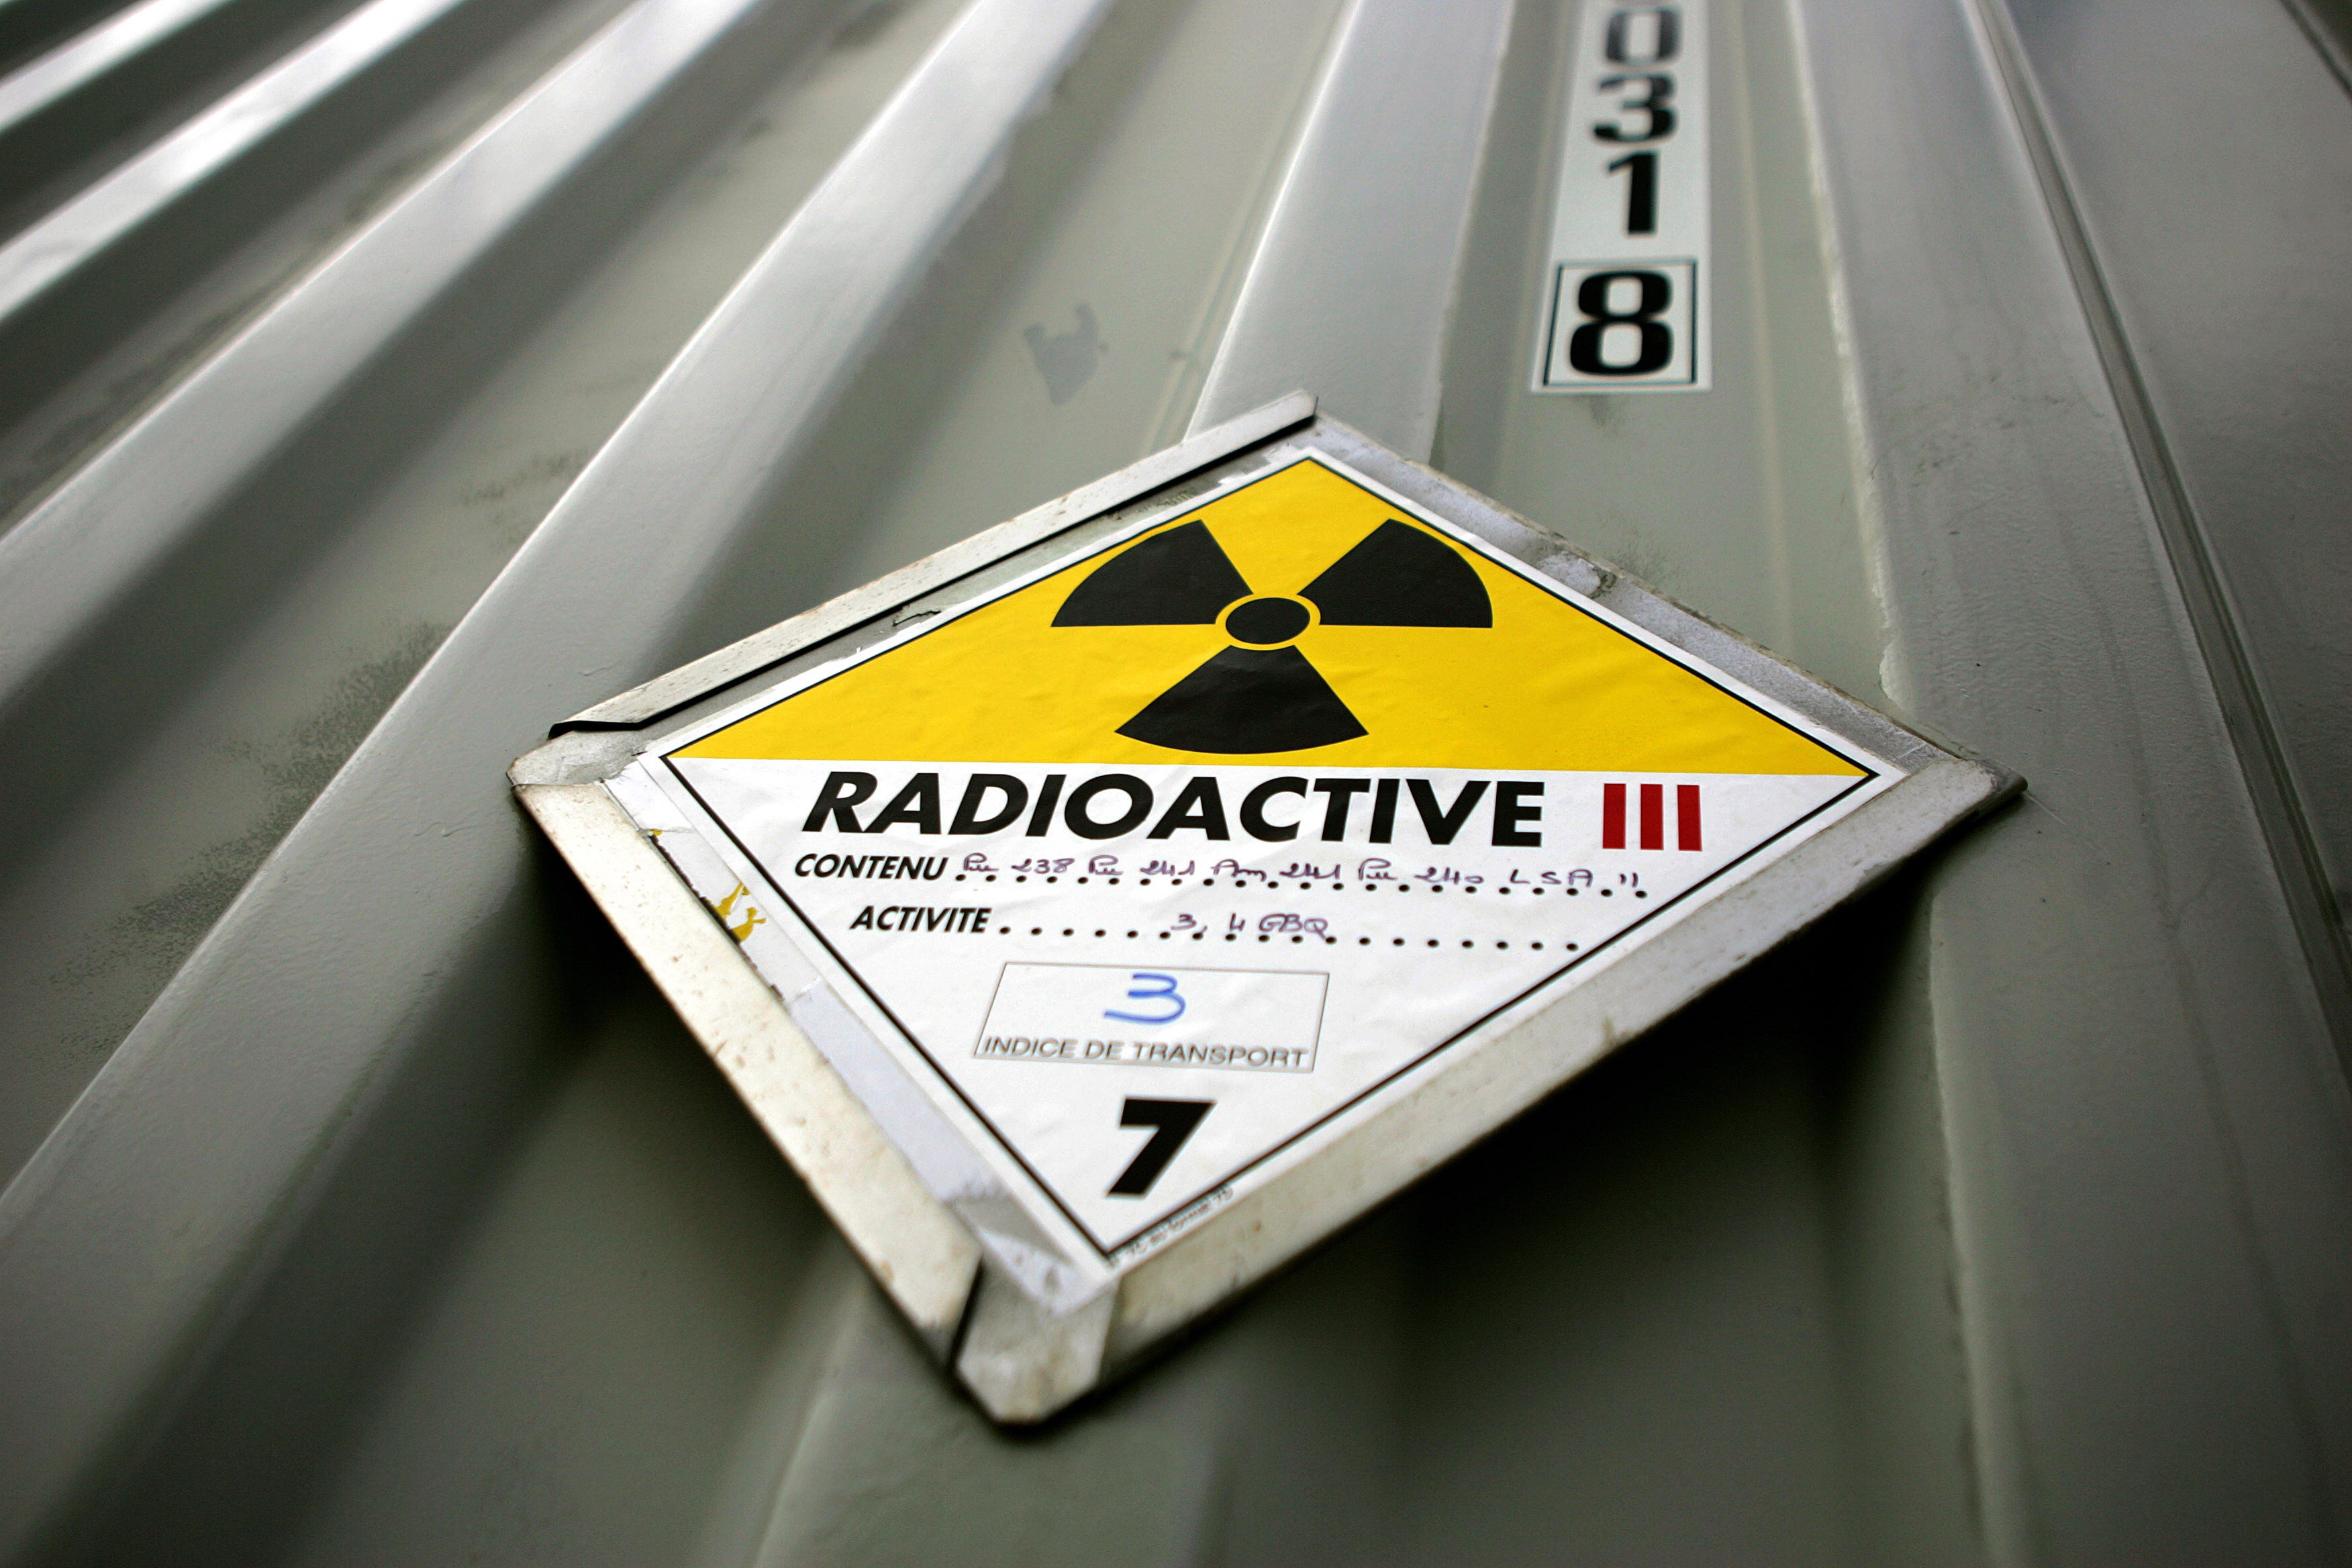 Australia’s nuclear safety agency is now assisting in the hunt of tiny but highly-radioactive Caesium-137 capsule with the help of specialised car-mounted and portable detection equipment